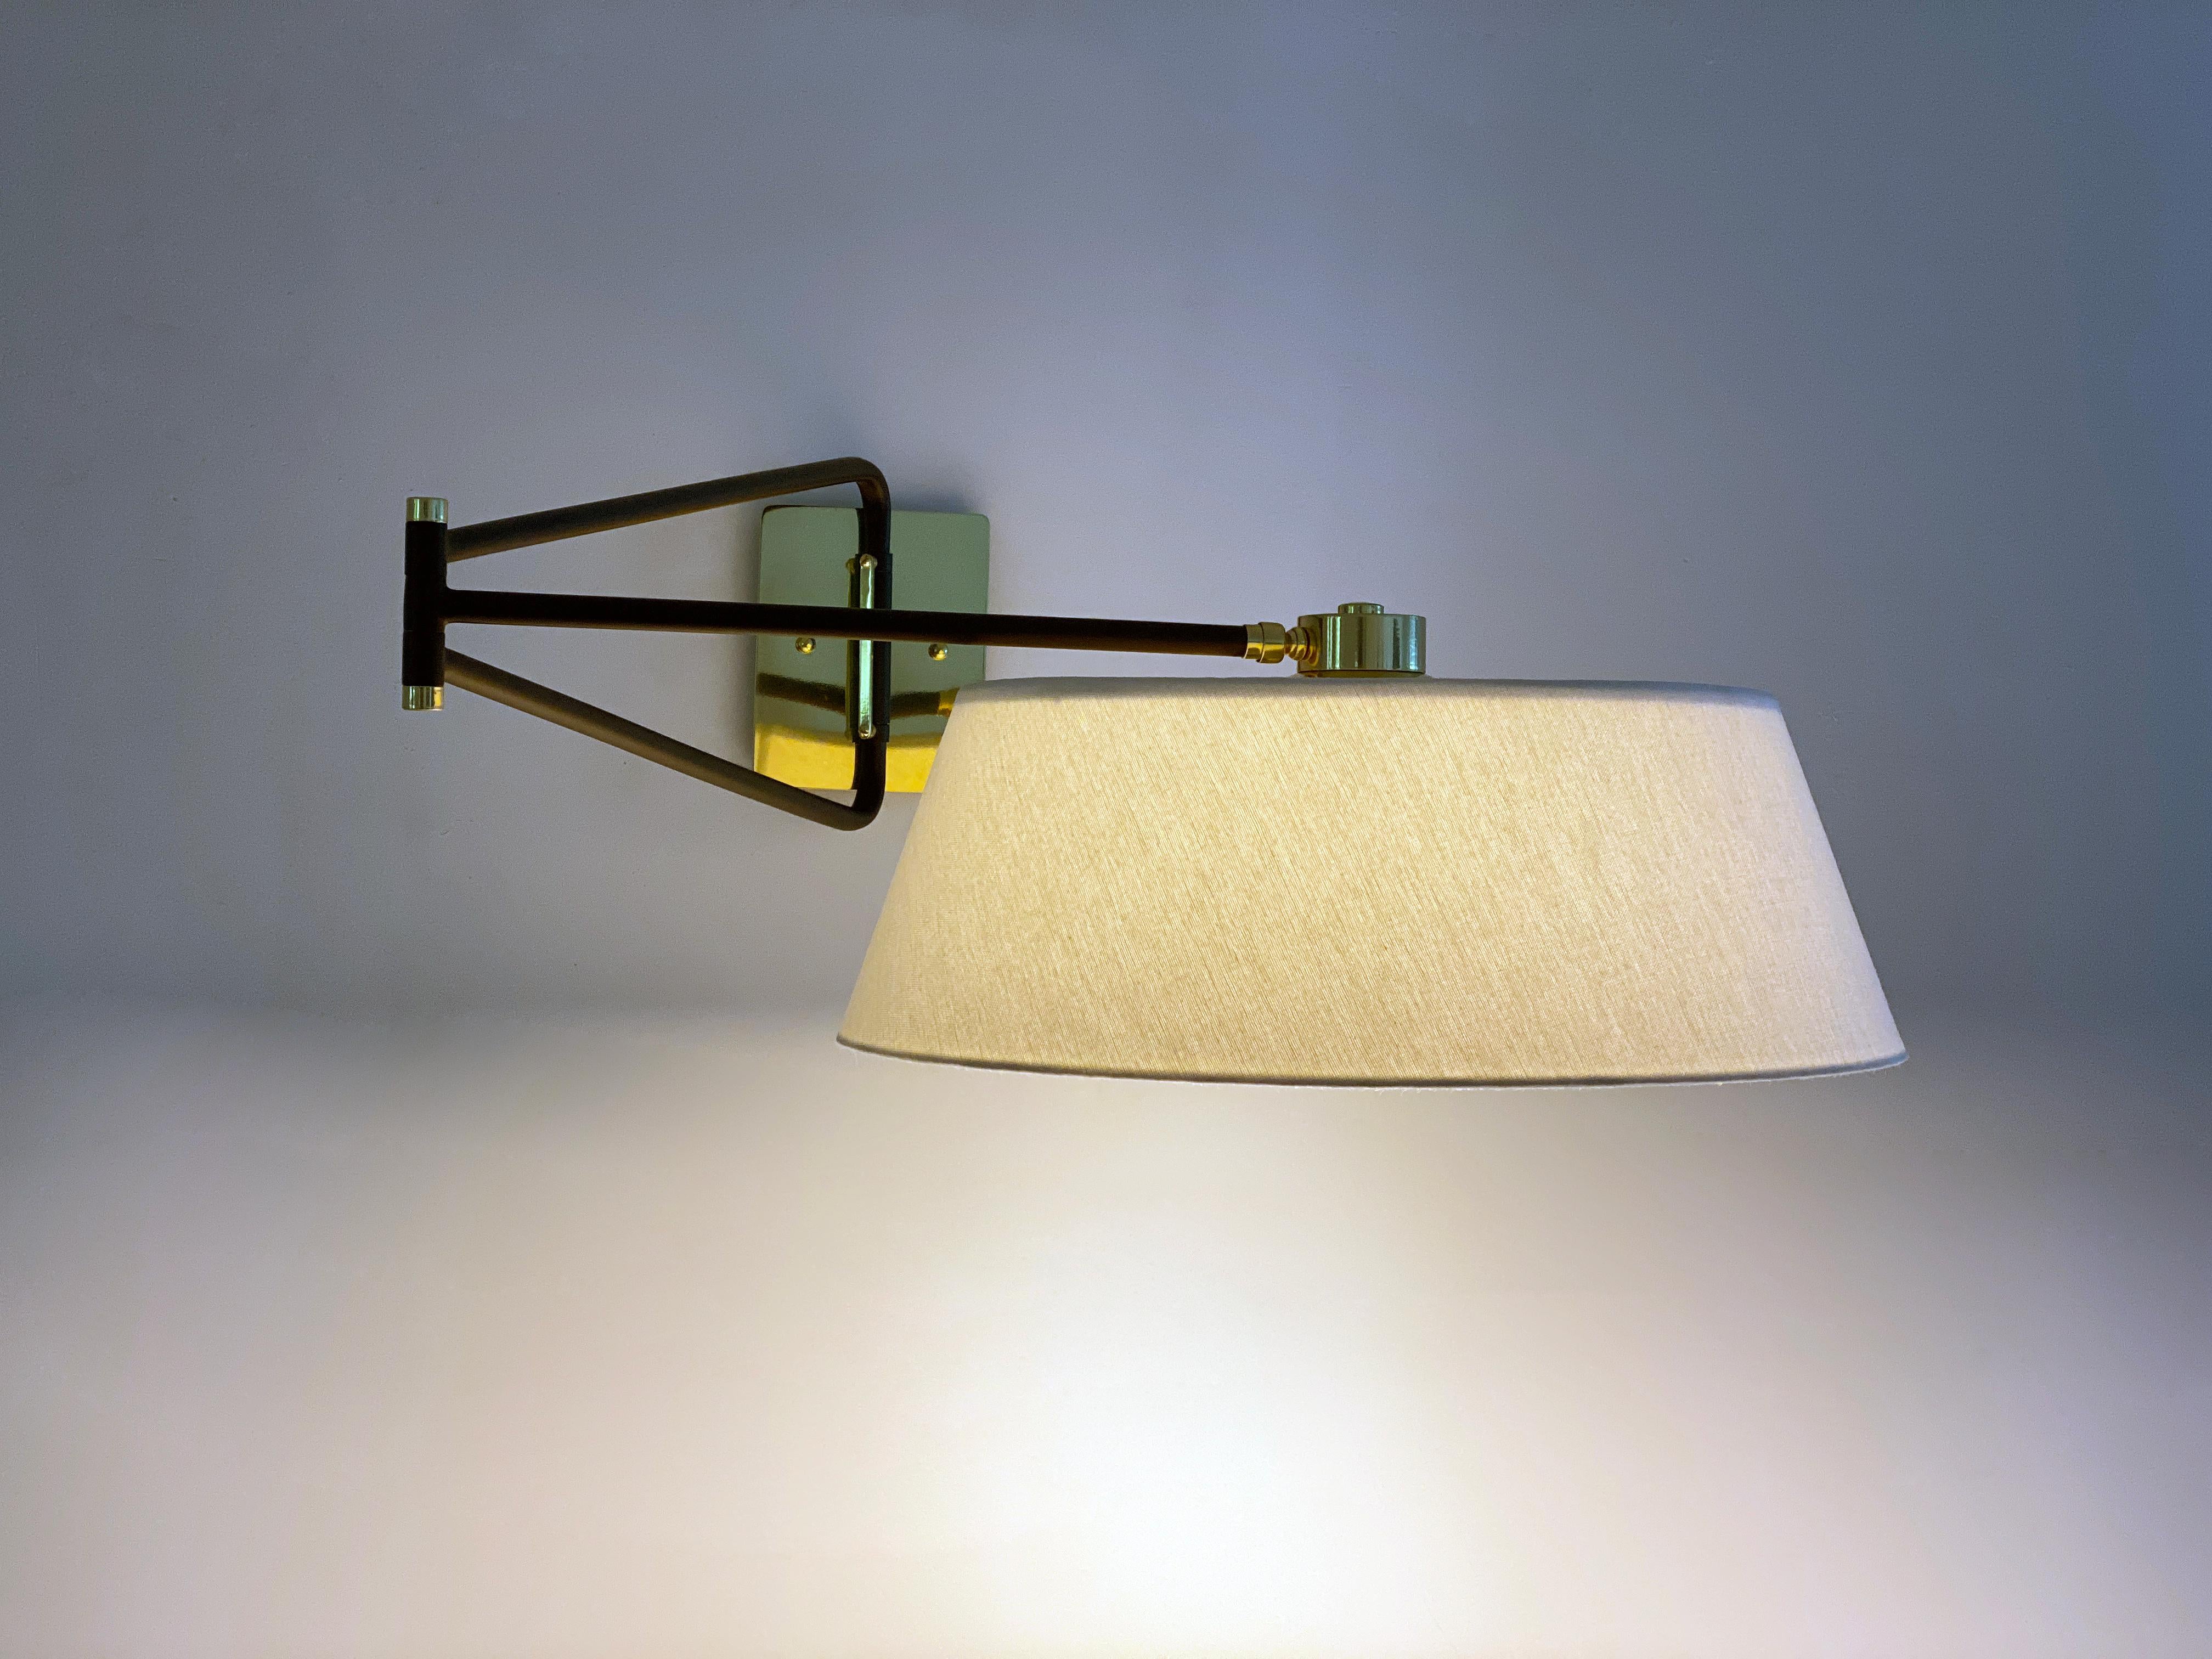 This sleek sconce is 1950s French mid-century by inspiration. Its a companion piece to our Bolivar sconce. The light with its single down shade and articulated arm creates a versatile lighting source. The head pivots to direct the light in various